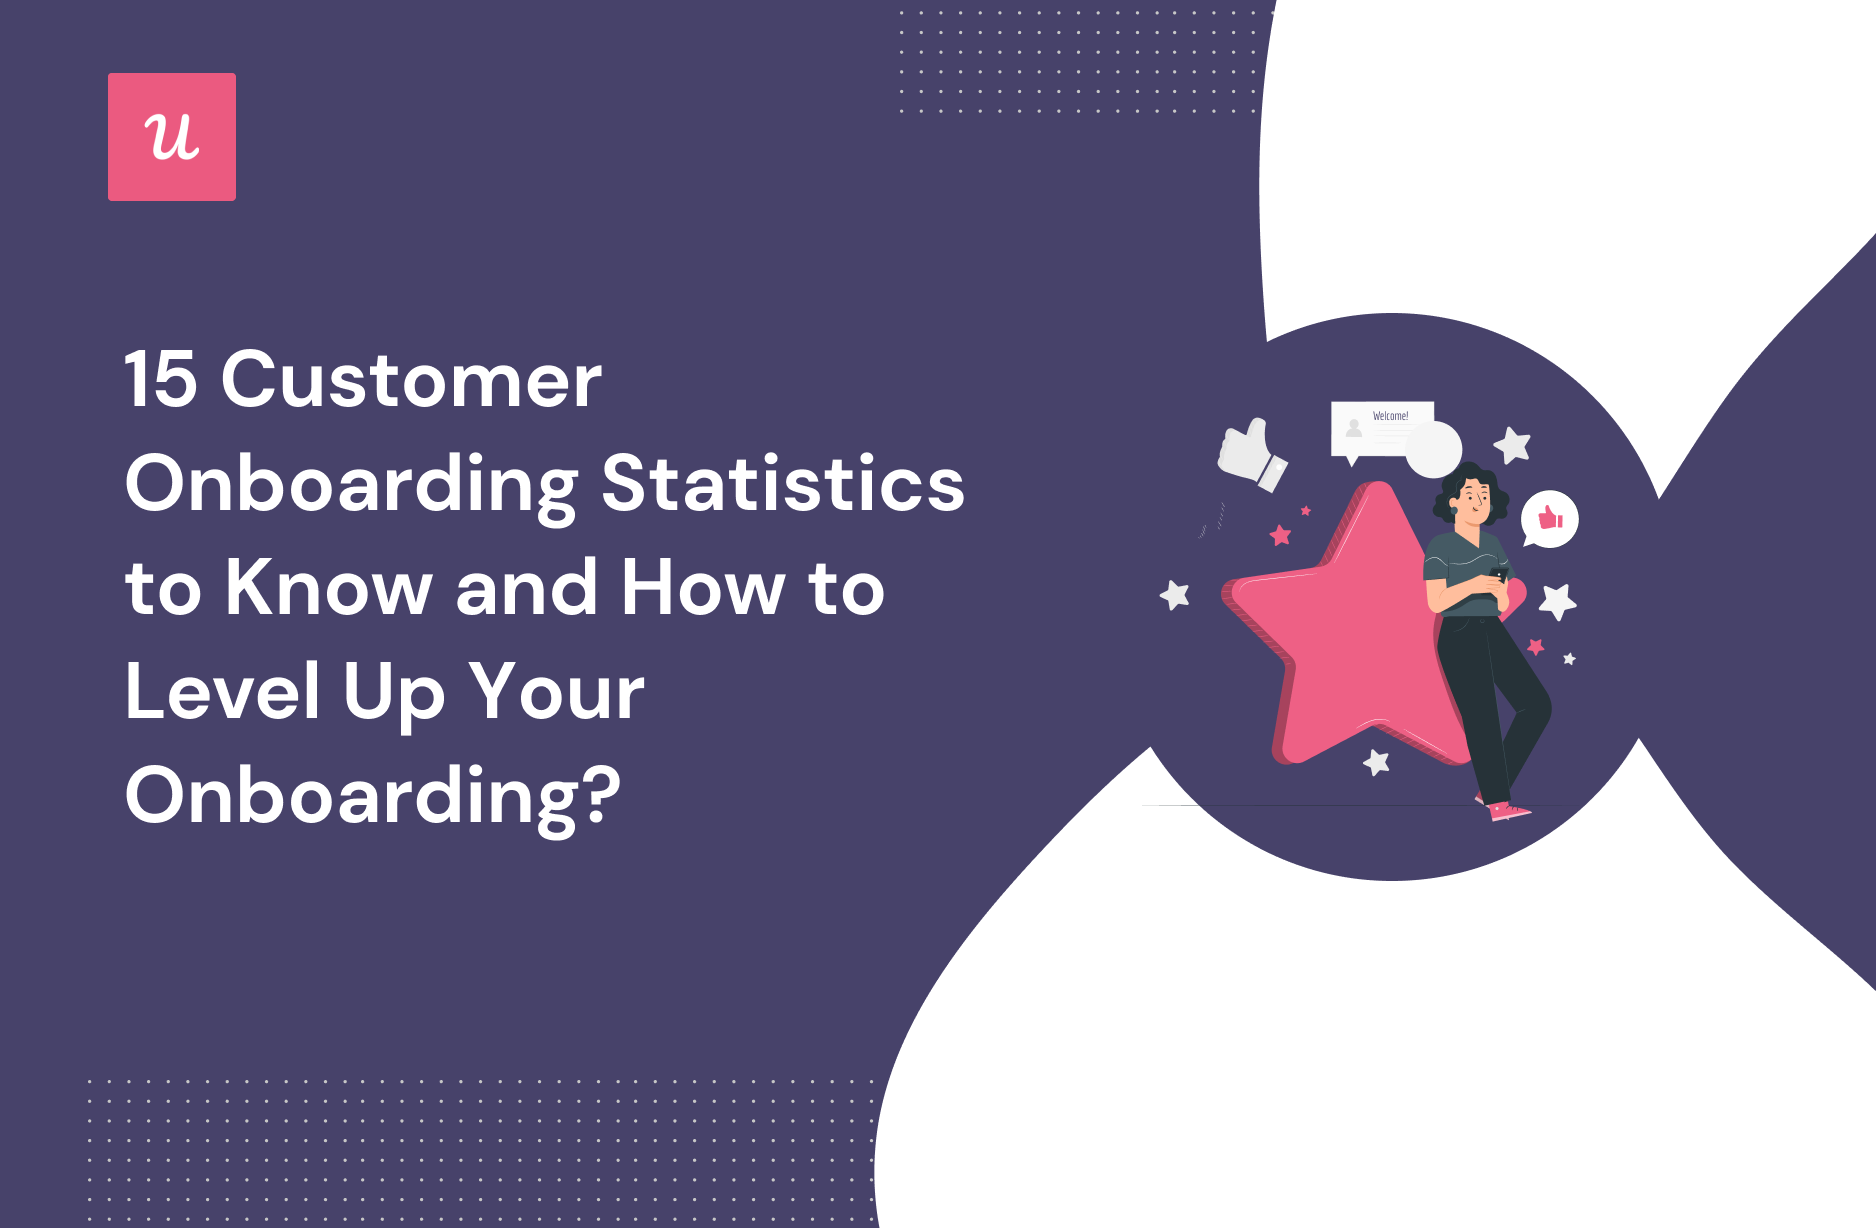 15 Customer Onboarding Statistics To Know and How To Level Up Your Onboarding? Welcome!